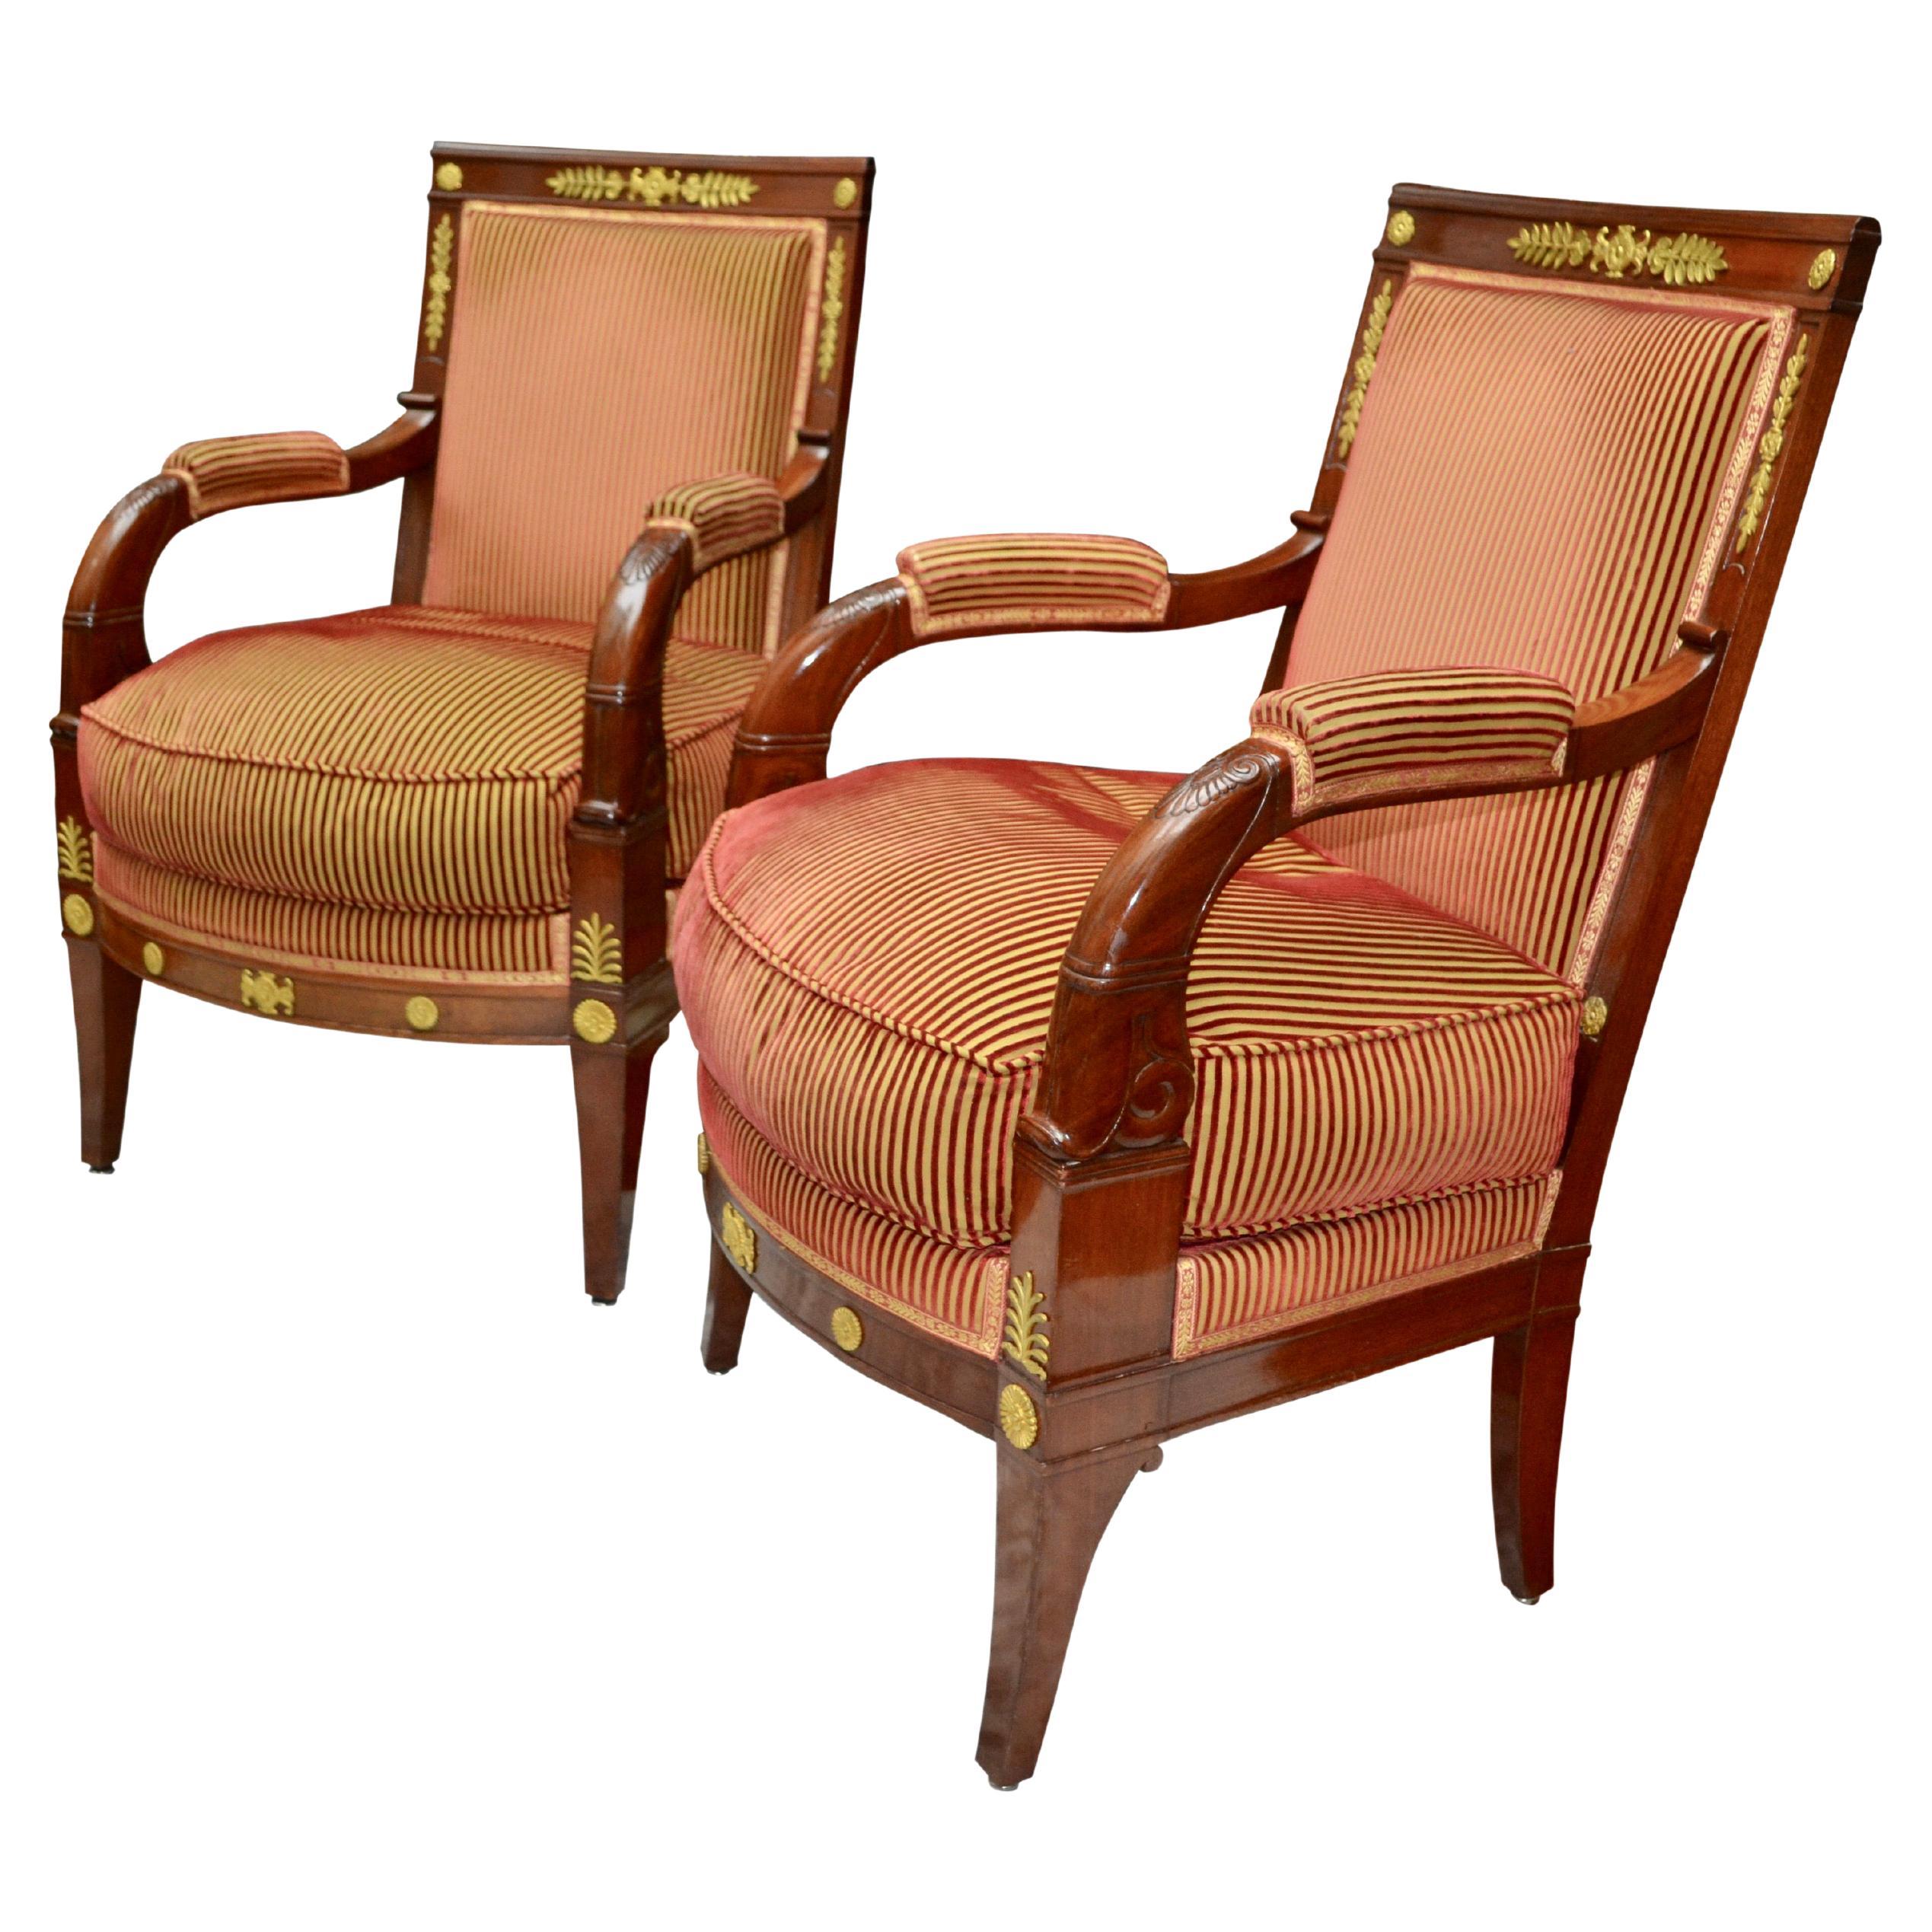 Pair of Early 19th Century French Empire Mahogany Armchairs "A La Reine"